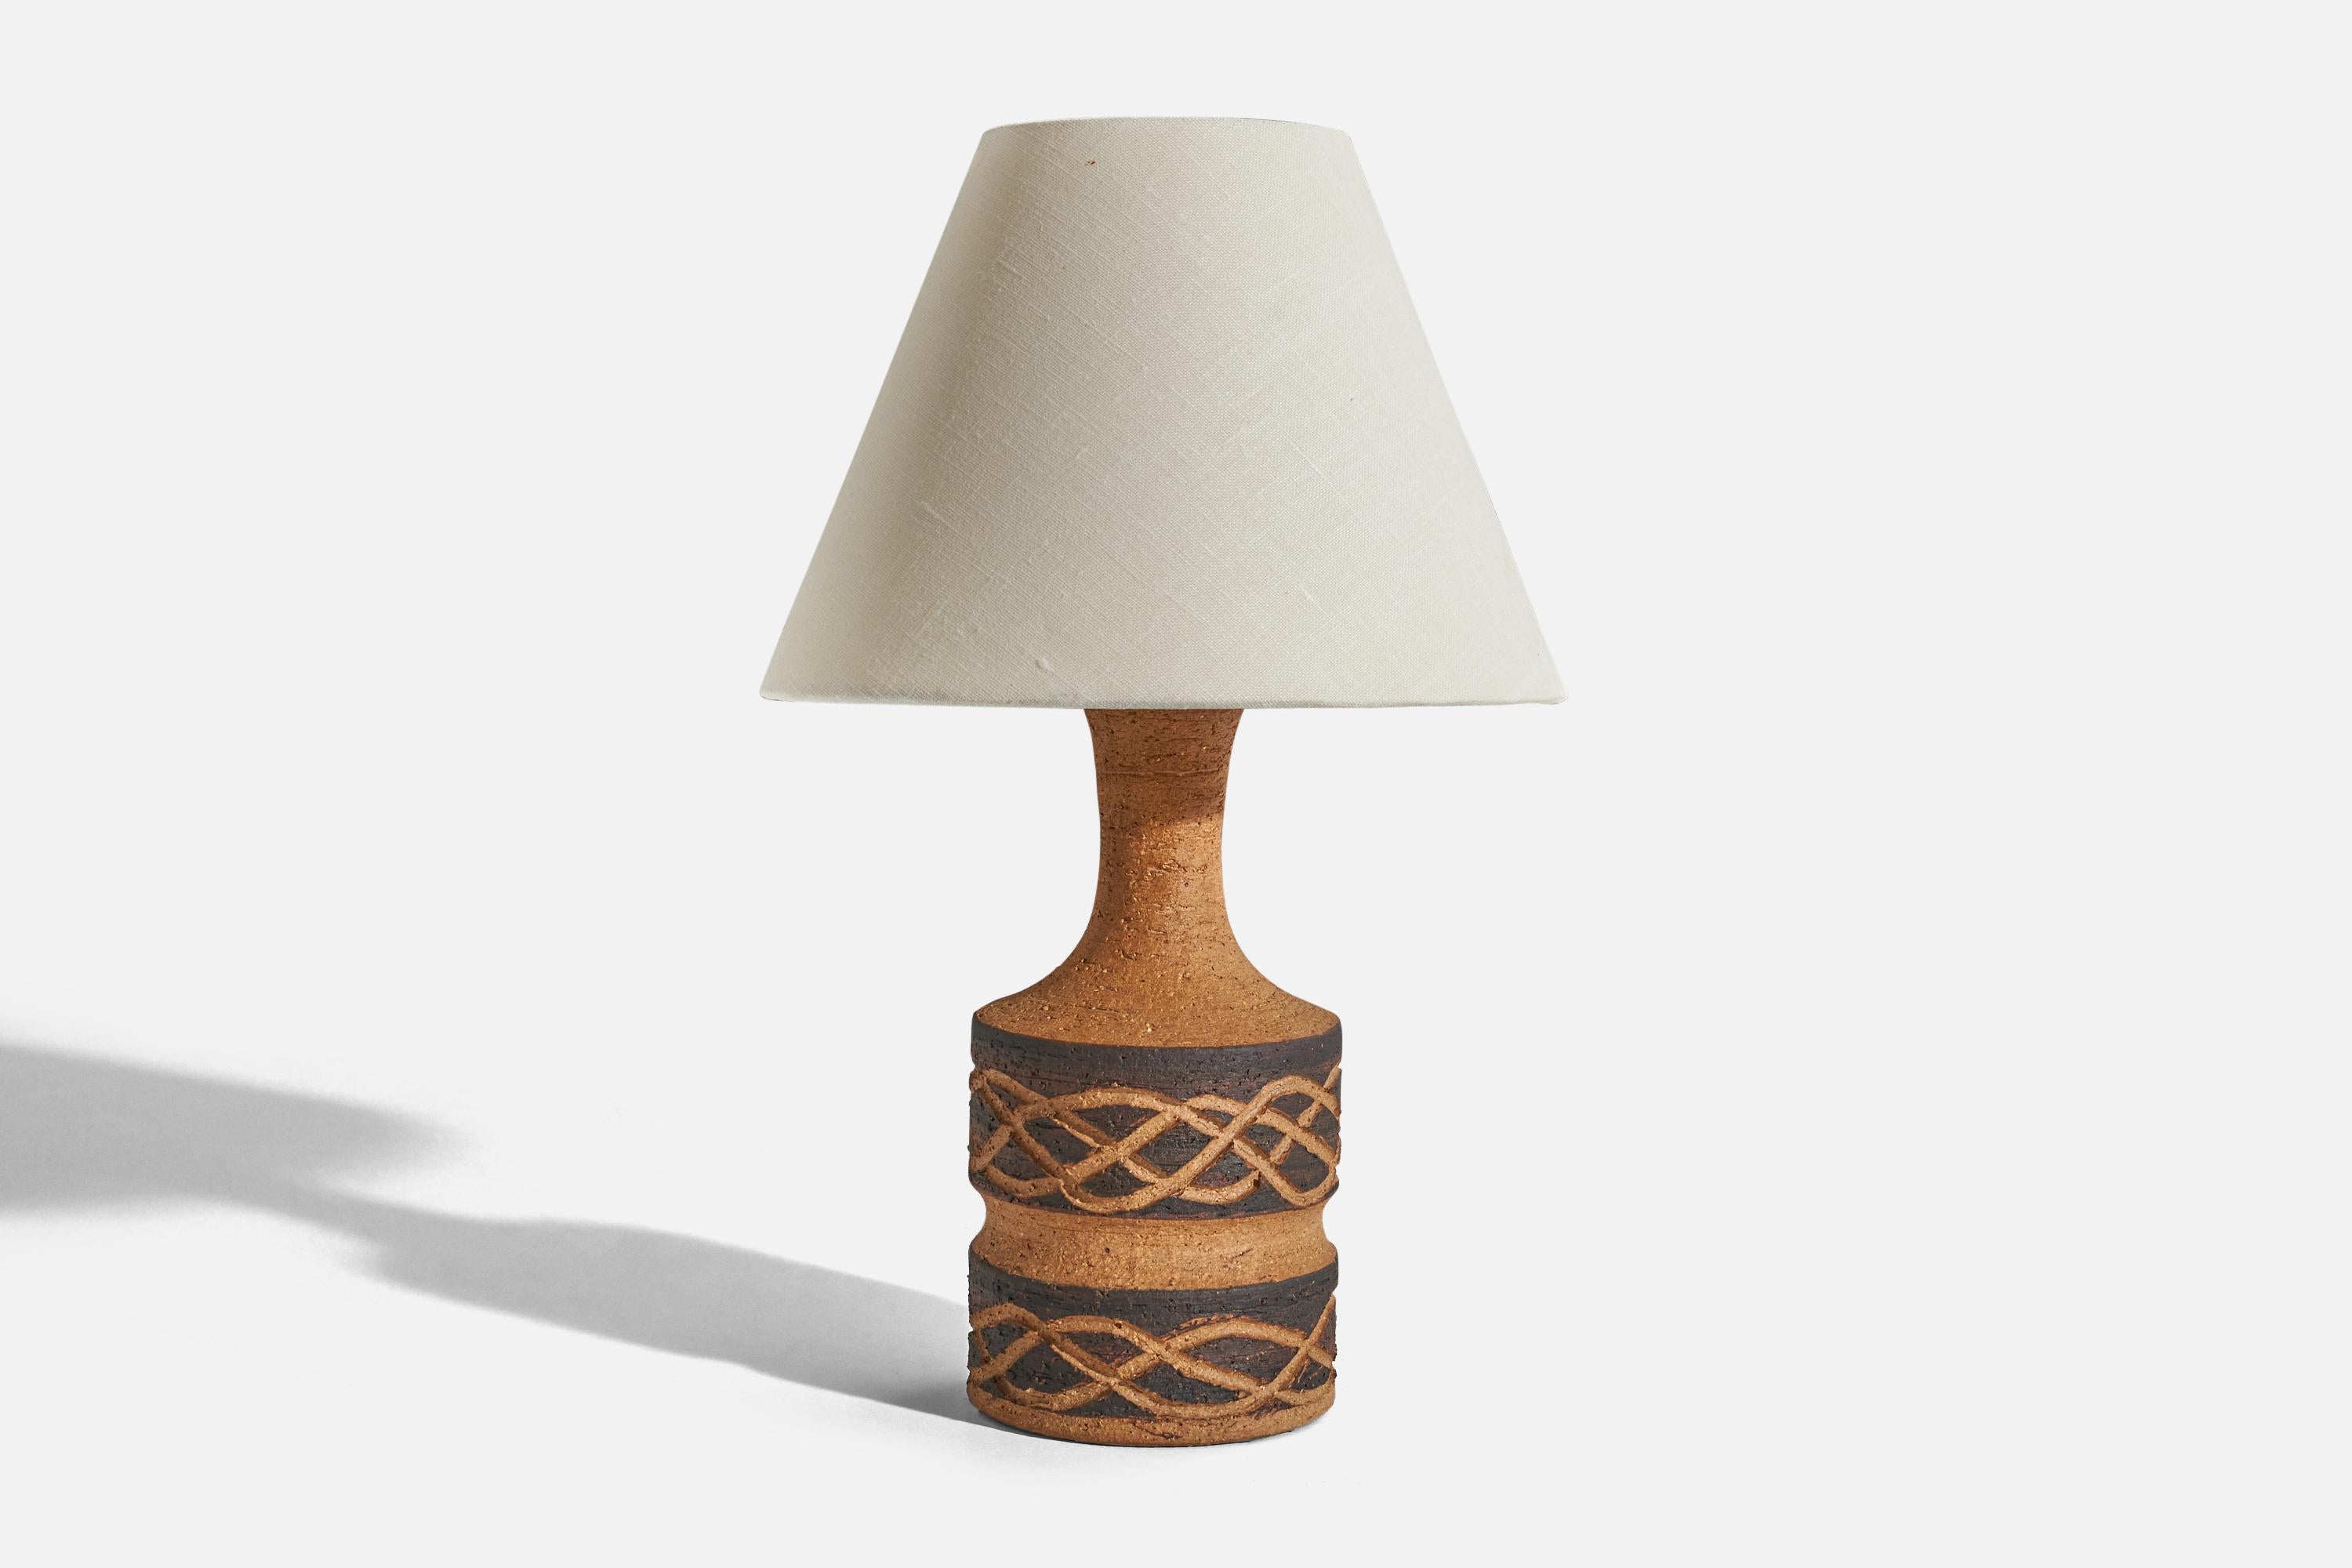 A black and brown, glazed stoneware table lamp designed and produced by Jette Hellerøe, Denmark, 1960s.

Sold without lampshade. 
Dimensions of lamp (inches) : 10.12 x 4 x 4 (H x W x D)
Dimensions of shade (inches) : 4 x 8.25 x 6.25 (T x B x